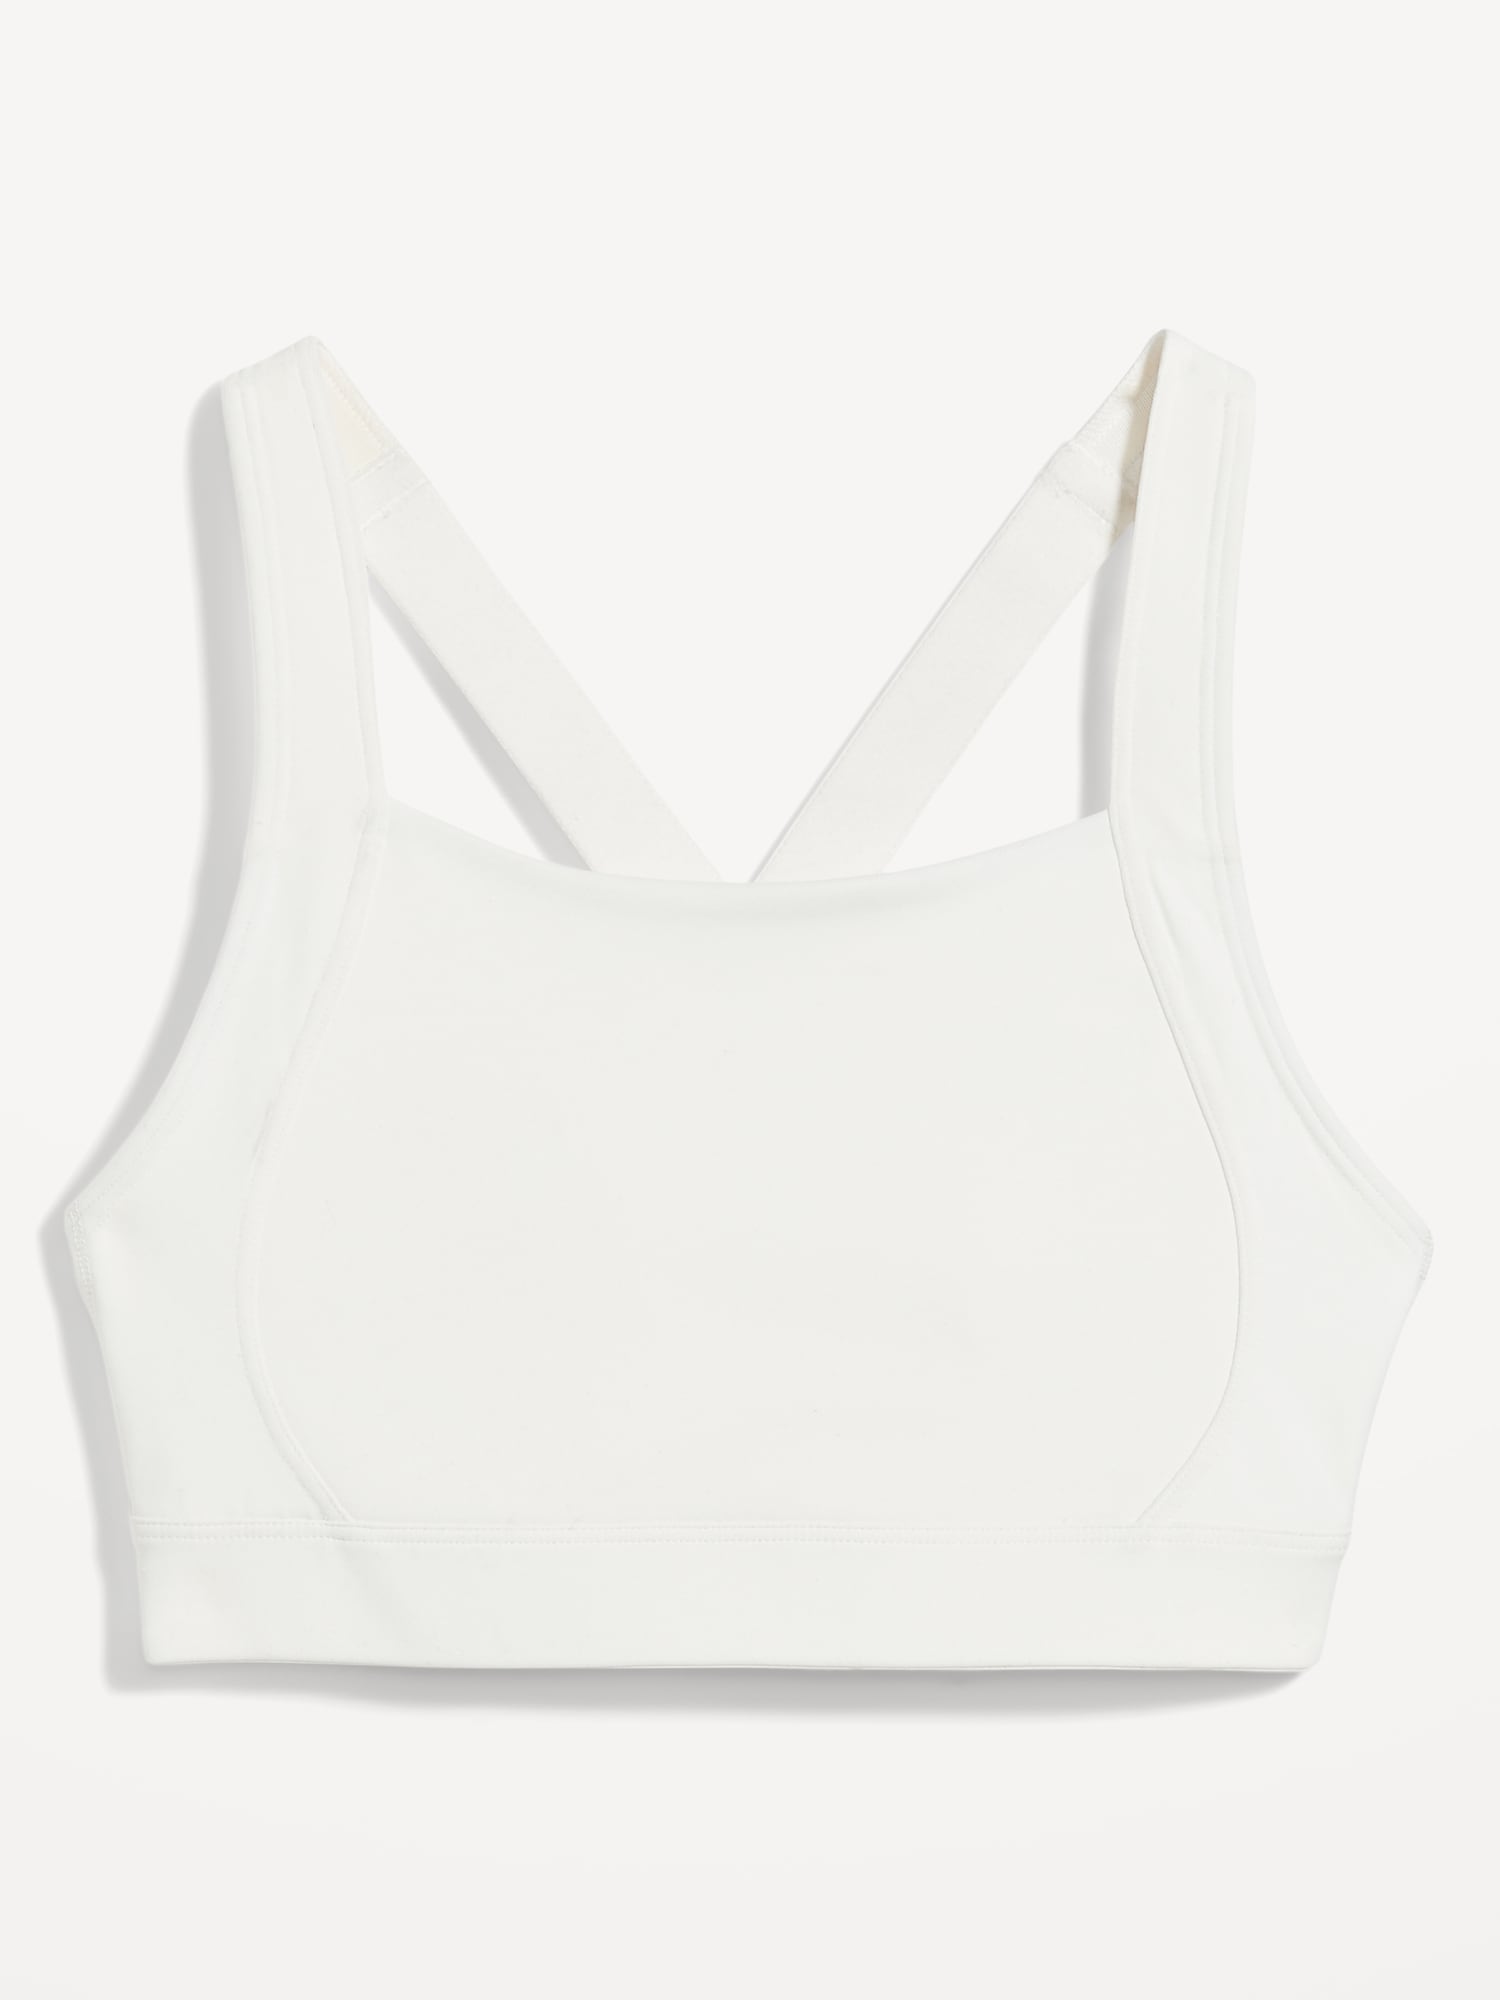 High Support PowerSoft Sports Bra for Women XS-XXL | Old Navy